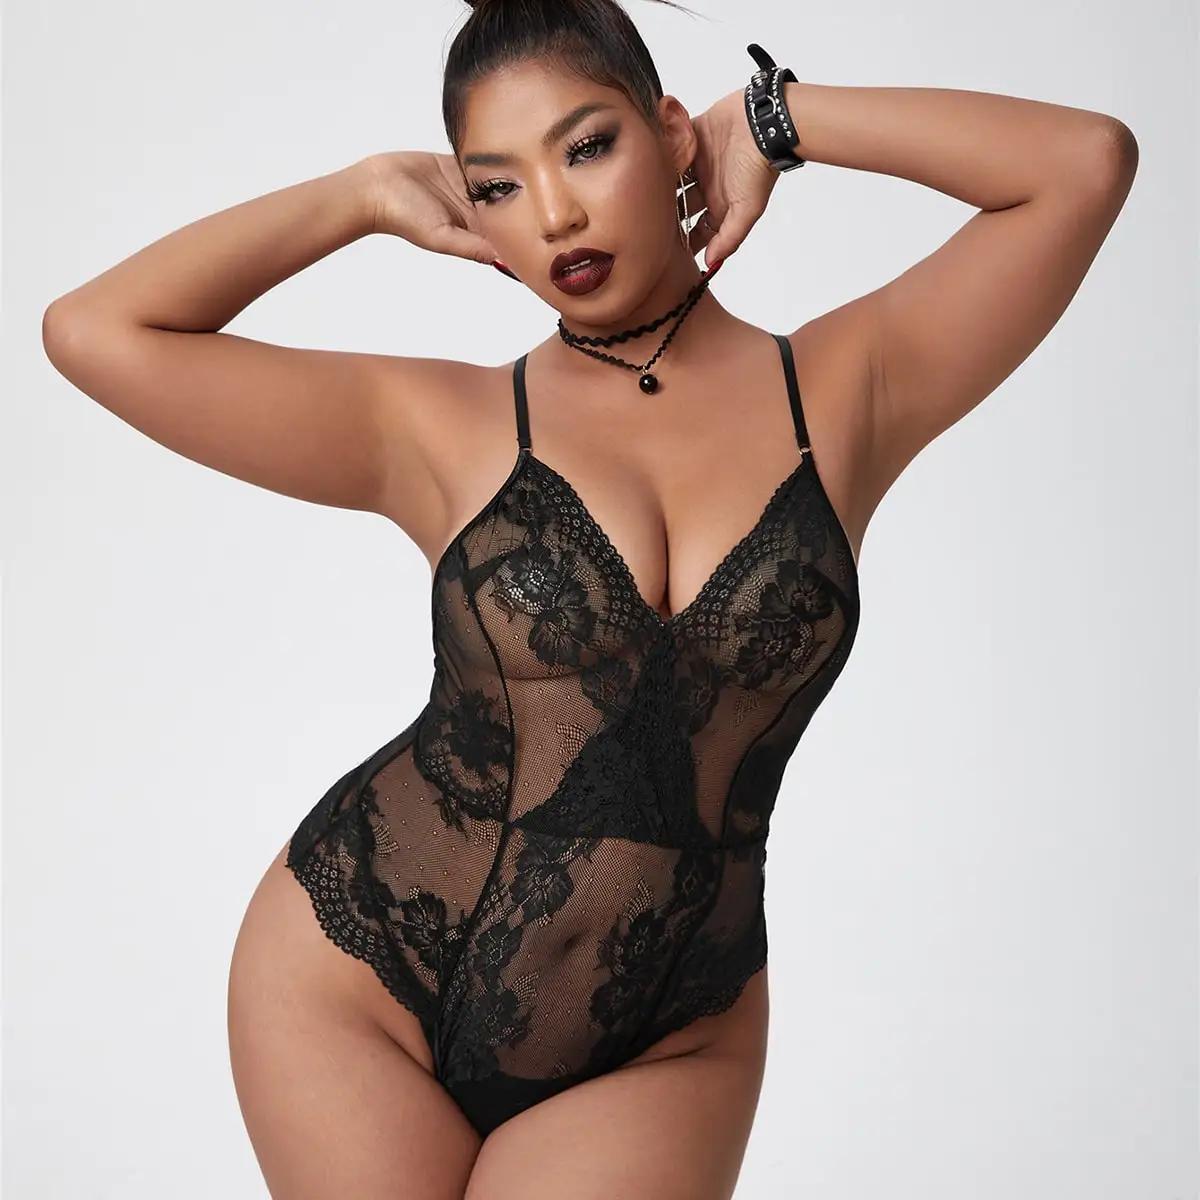 Porn For Women Lingerie - Women Porn Taste Lingerie Hot Erotic Baby Dolls Dress Teddy Lenceria  Interest Mujer Babydoll Underwear Sentiment Costumes Plus - Buy Women Lace  Overalls For Women Transparent Body Women Clothes Female Backless Sexy